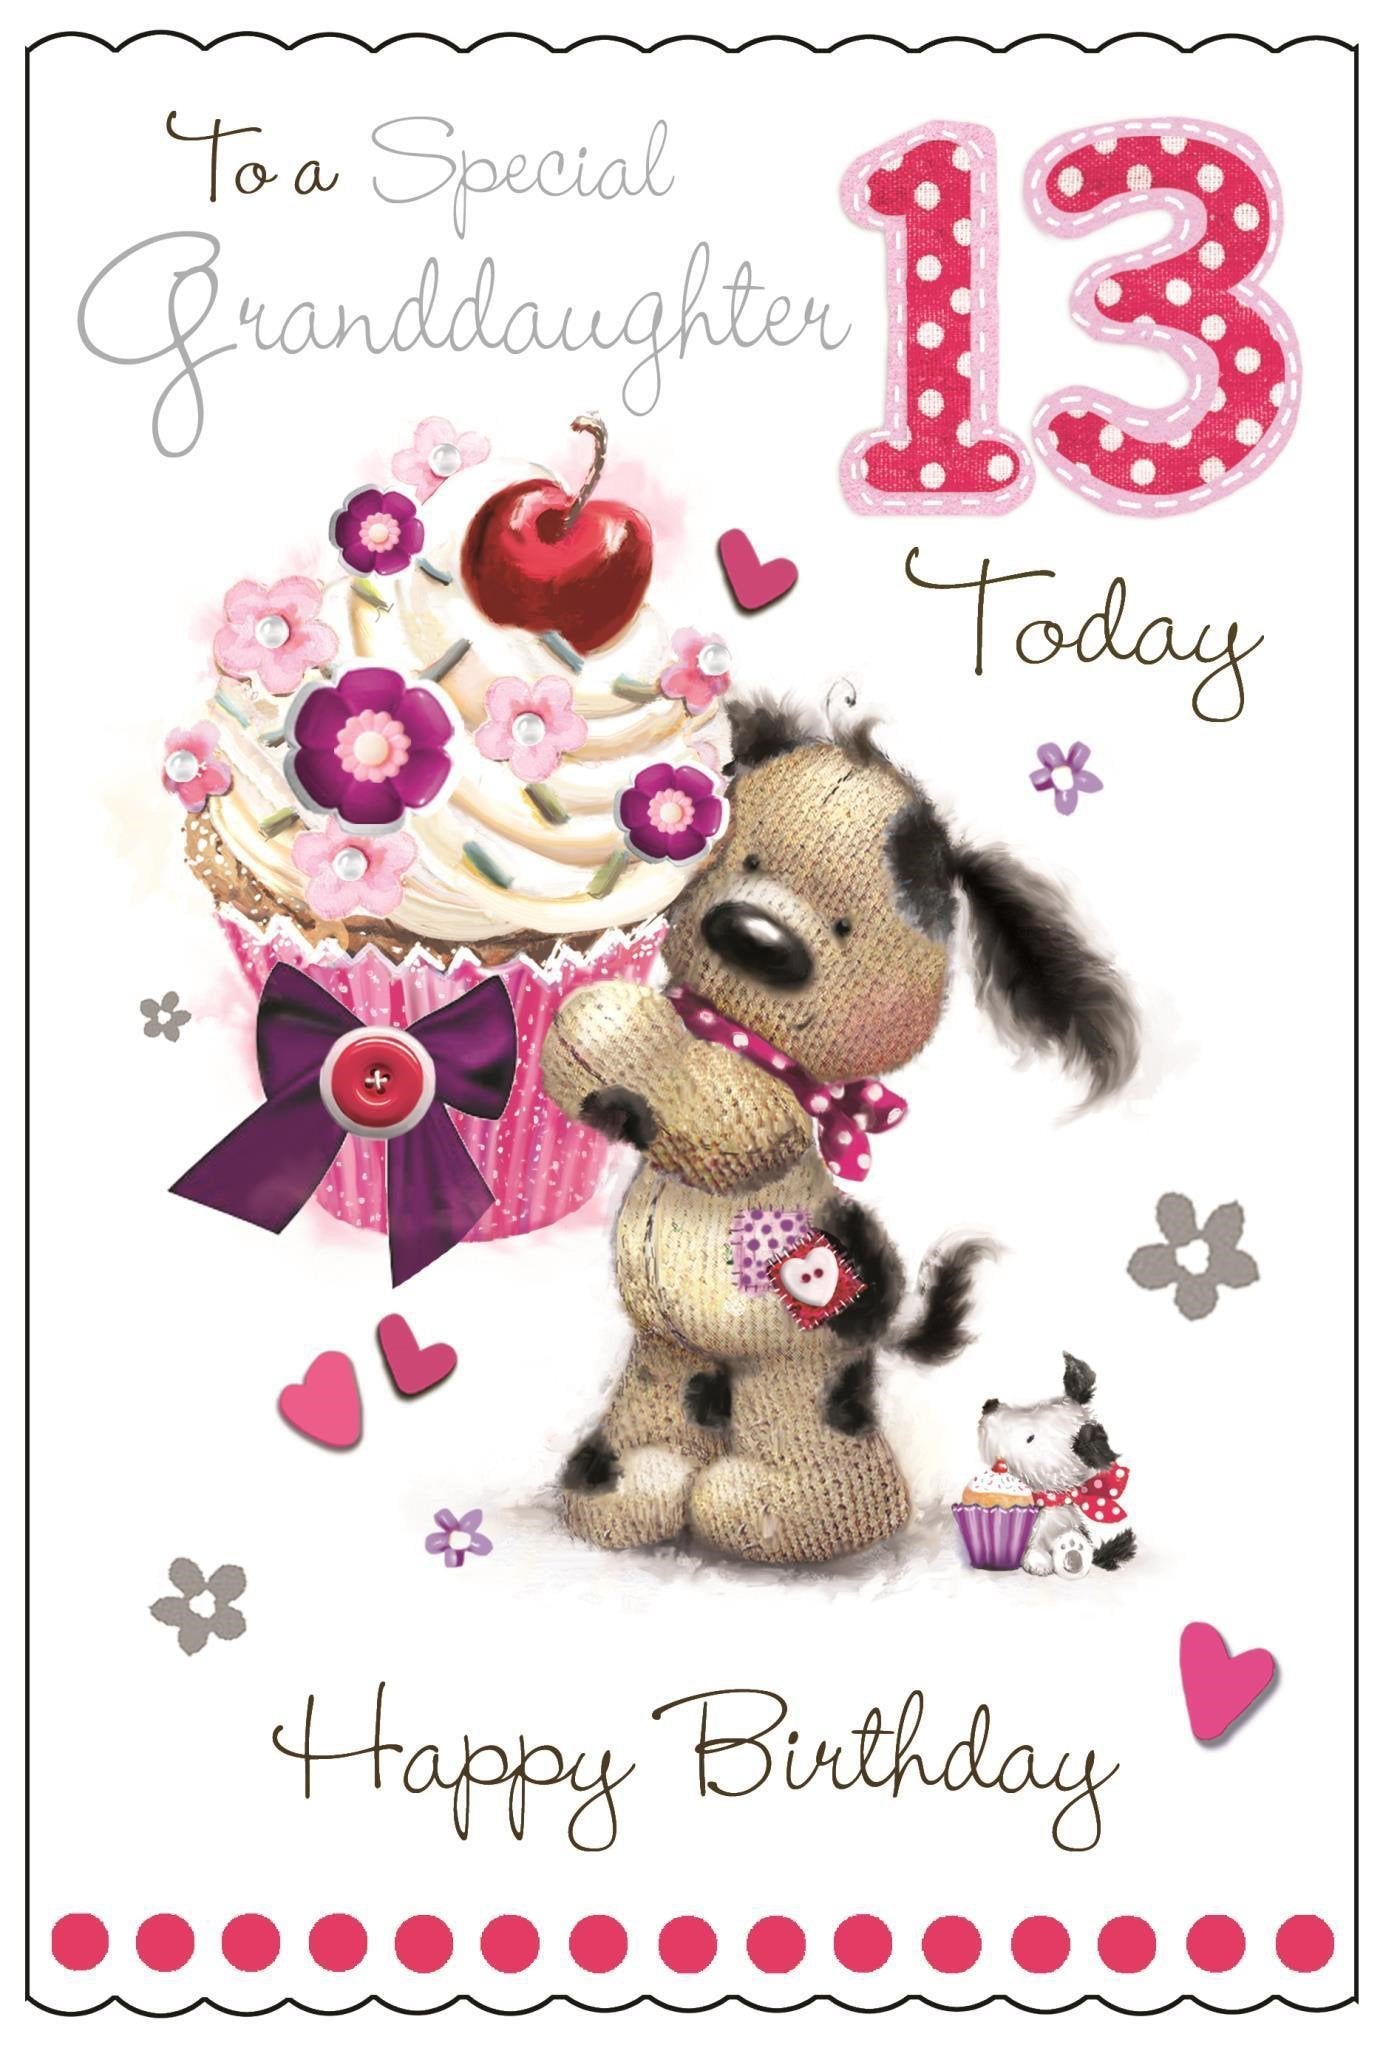 Front of Granddaughter 13th Birthday Cupcake Greetings Card